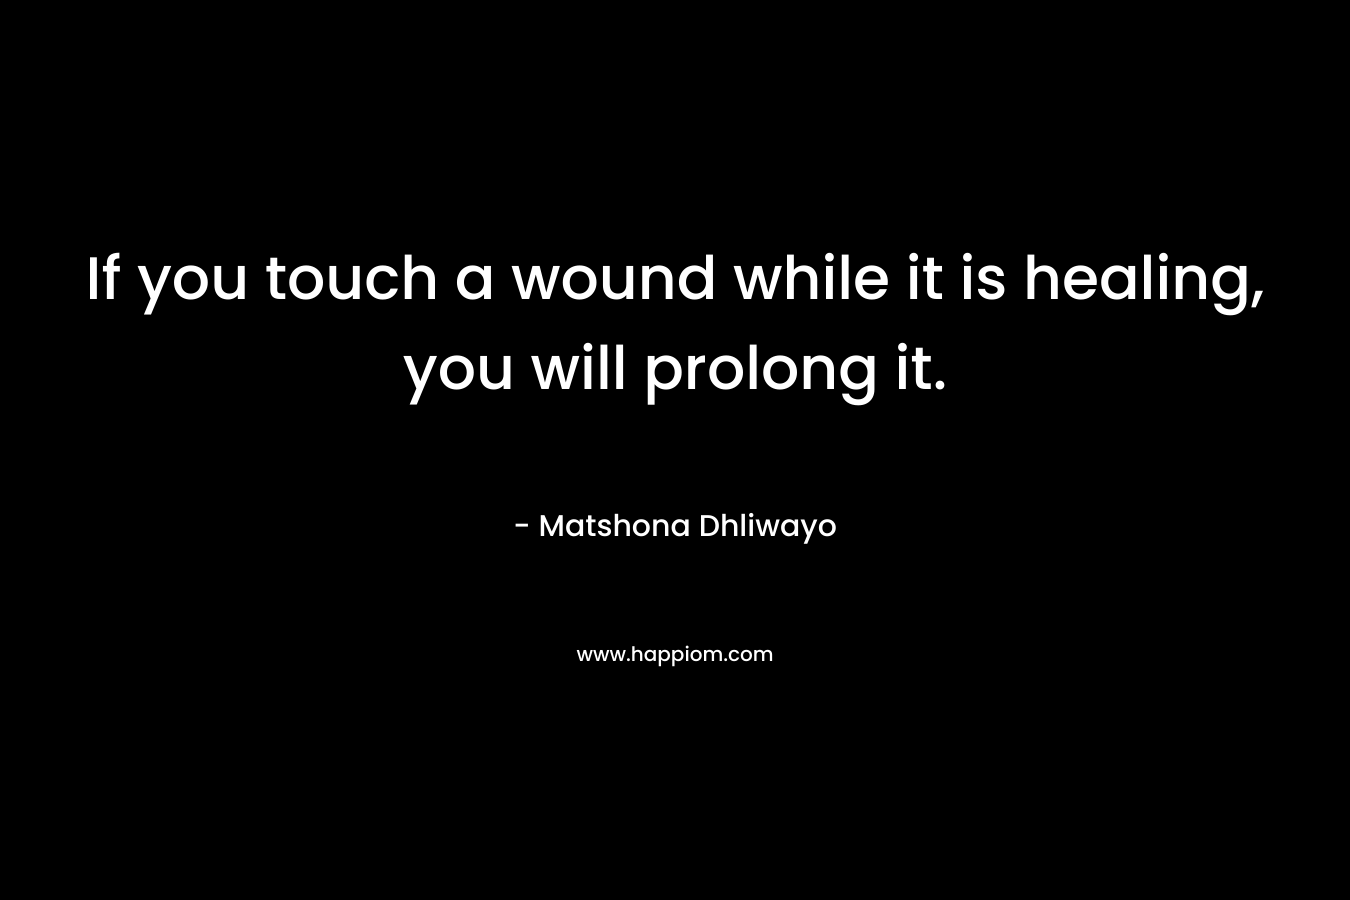 If you touch a wound while it is healing, you will prolong it.